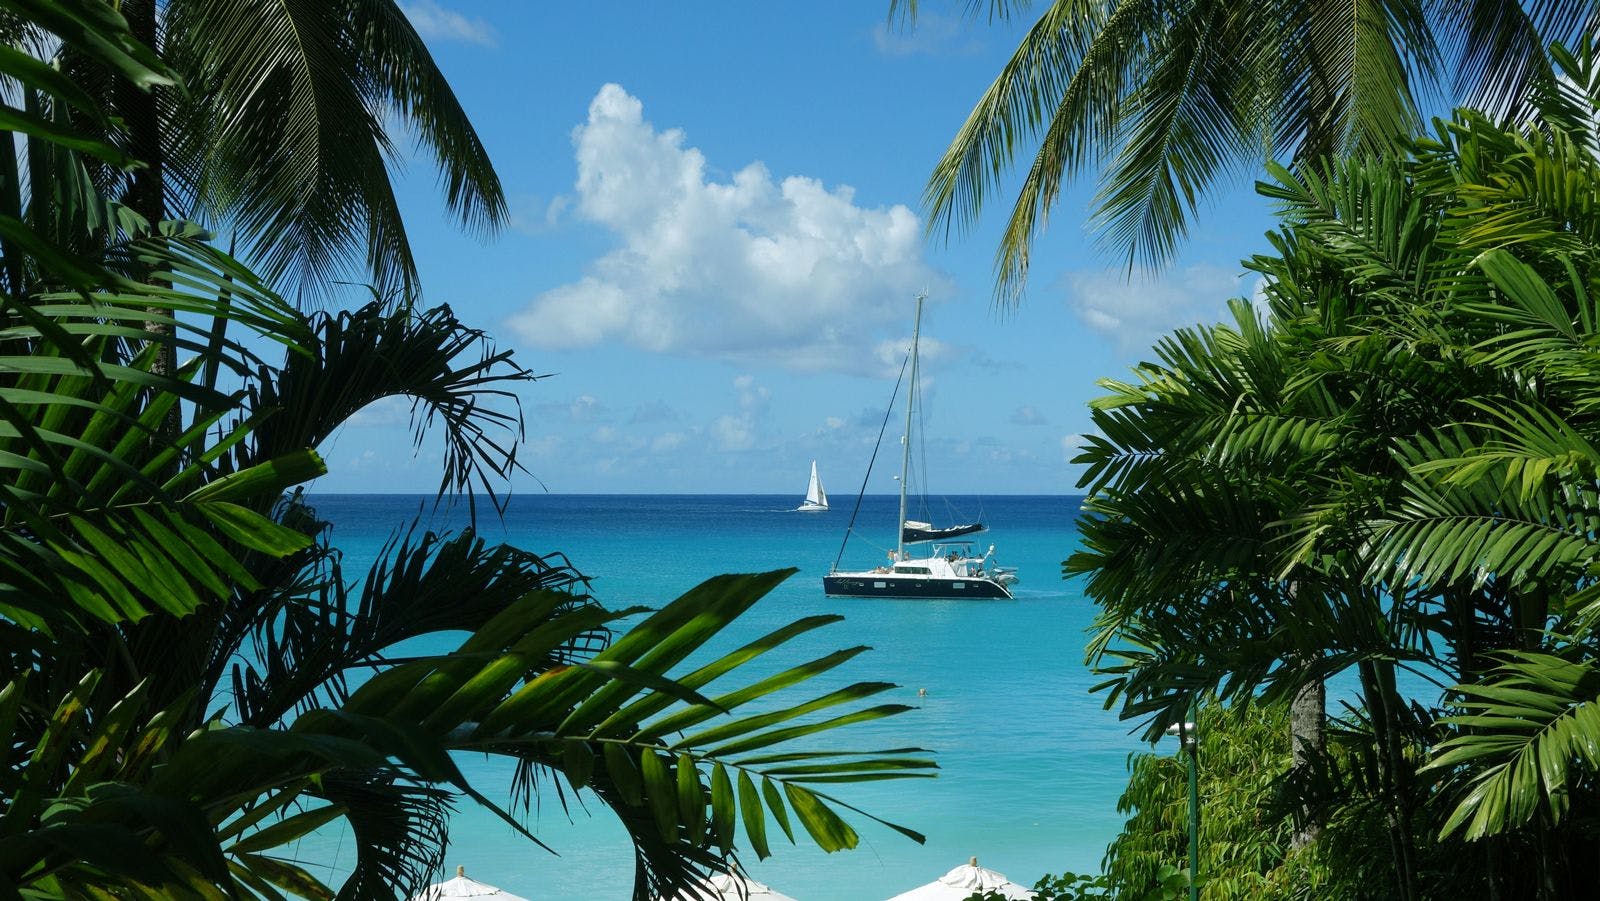 A yacht sailing on turquoise Caribbean Sea as viewed through the leaves of a palm tree